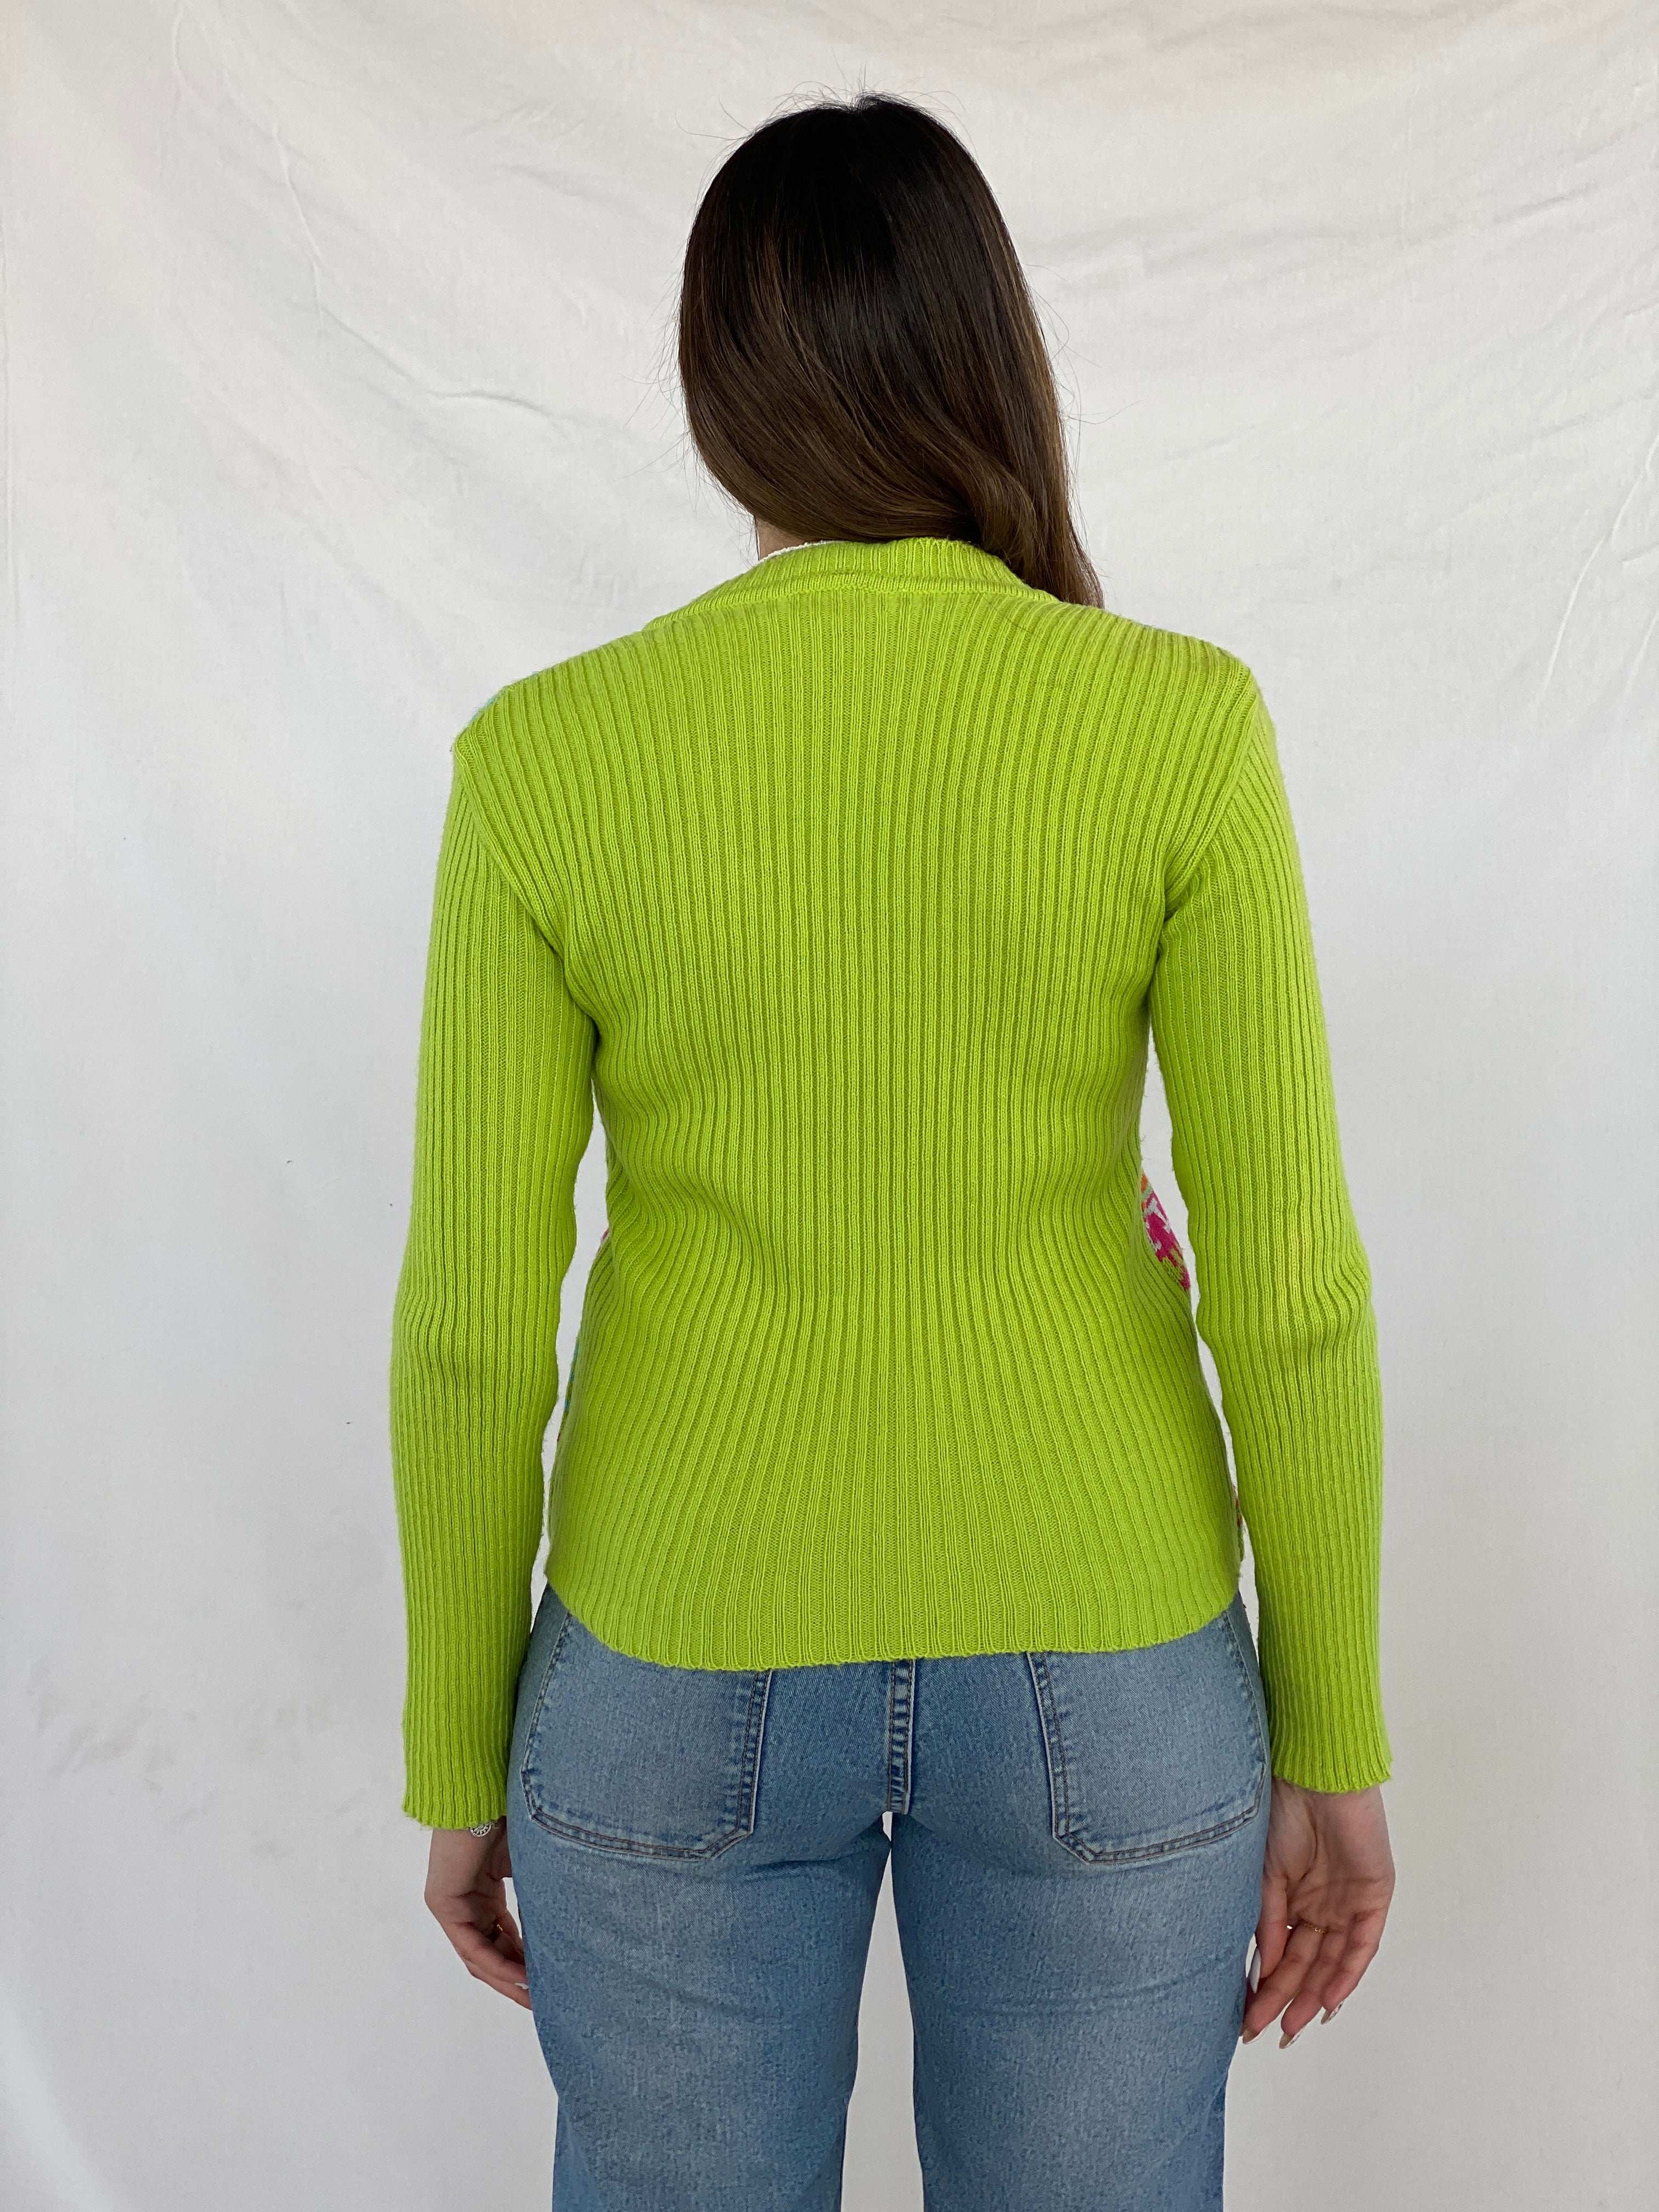 Vintage Sev-kut Collection Knitted Top - Balagan Vintage Full Sleeve Top 00s, 90s, Juana, NEW IN